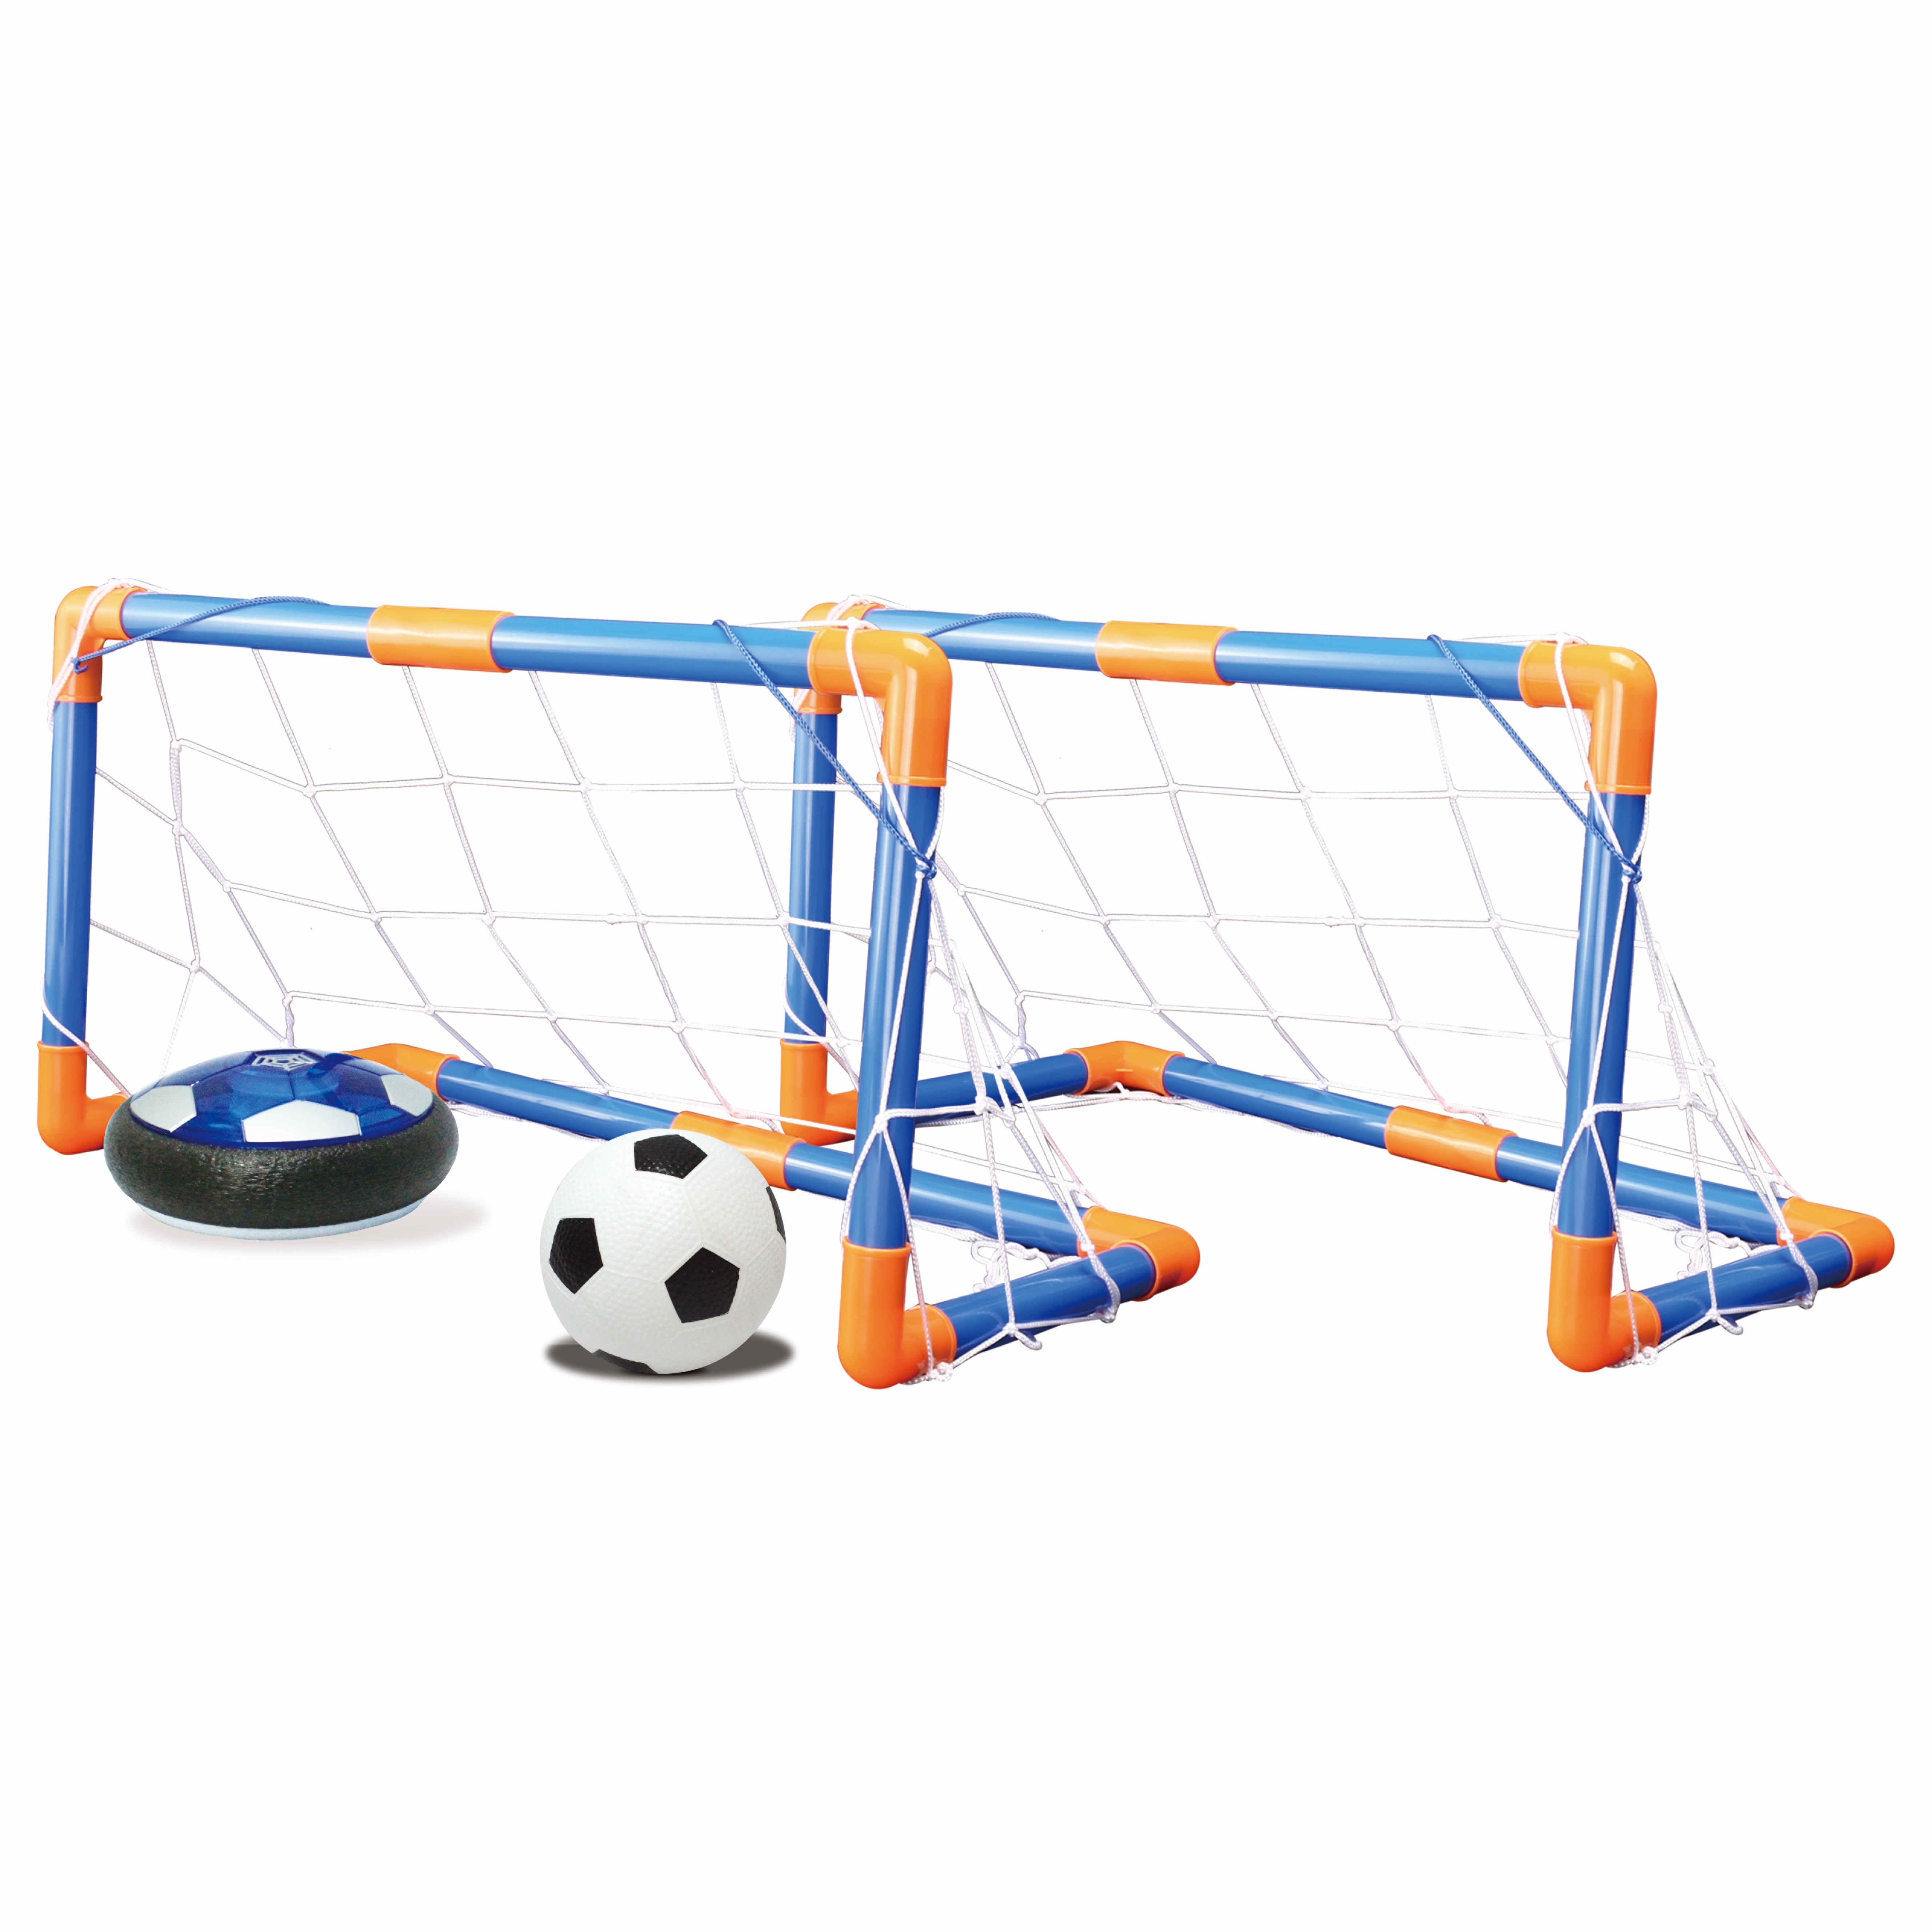 Set of 2 Unisex Kids Football Training Ball for Indoor Outdoor Soccer Toy Game 